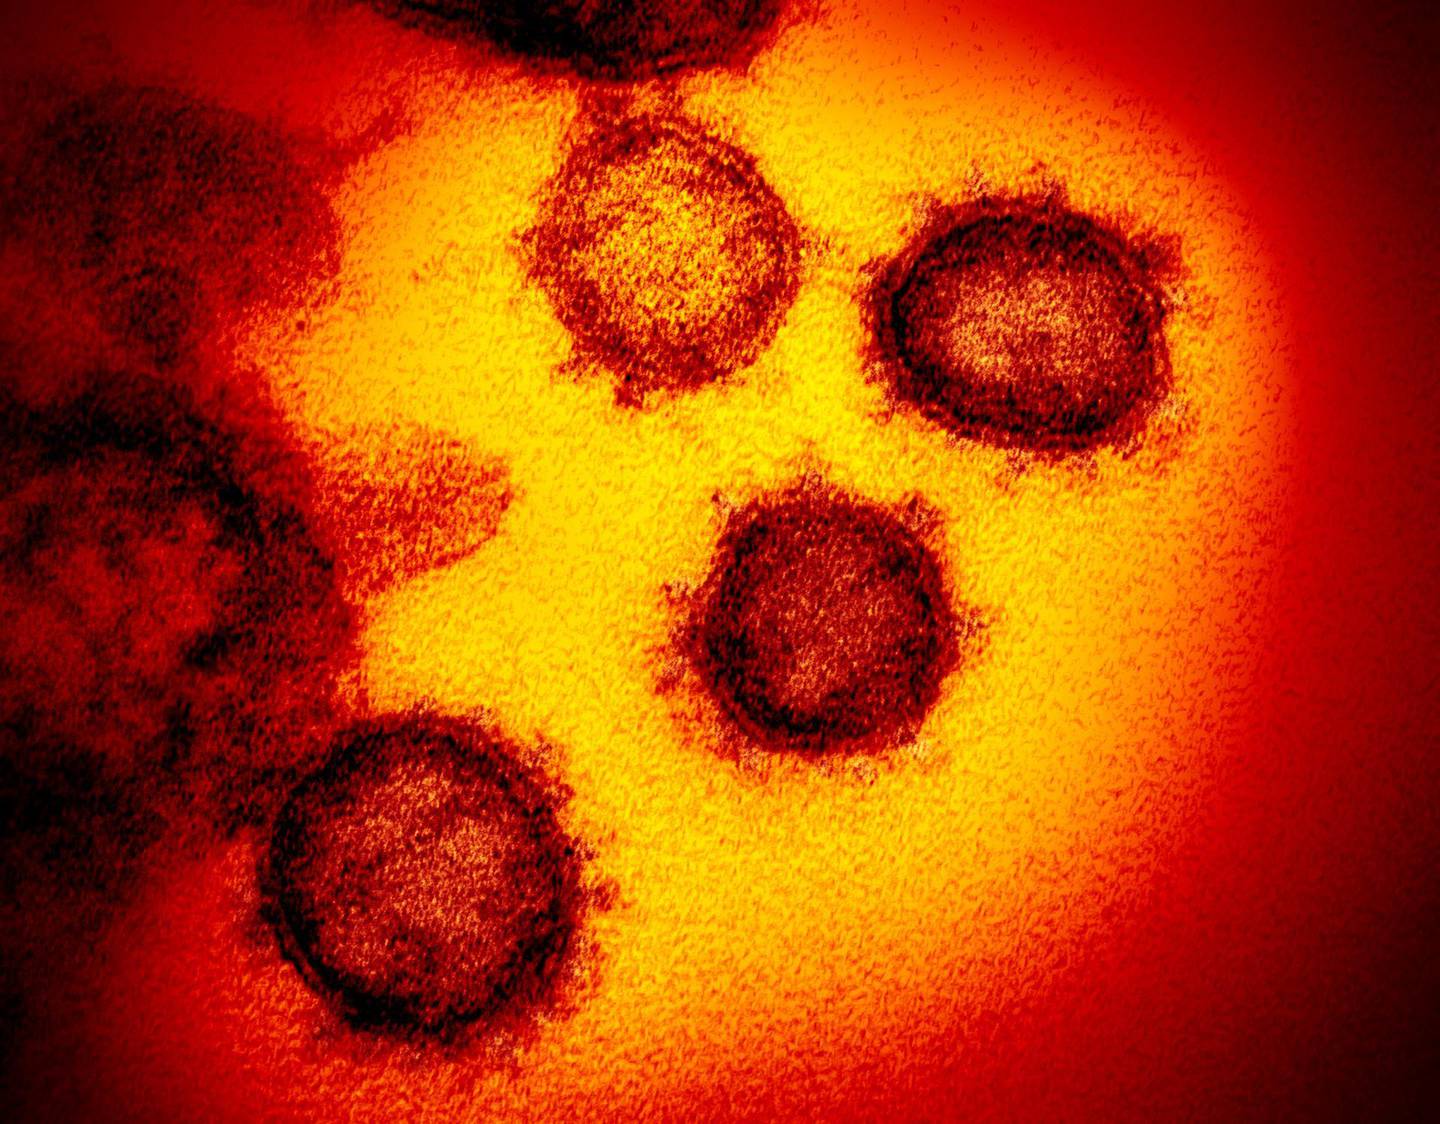 FILE - This undated electron microscope image made available by the U.S. National Institutes of Health in February 2020 shows the Novel Coronavirus SARS-CoV-2. Also known as 2019-nCoV, the virus causes COVID-19. The sample was isolated from a patient in the U.S. On Tuesday, April 21, 2020, U.S. health regulators OK'd the first coronavirus test that allows people to collect their own sample at home, a new approach that could help expand testing options in most states. The sample will still have to be shipped for processing back to LabCorp, which operates diagnostic labs throughout the U.S. (NIAID-RML via AP)